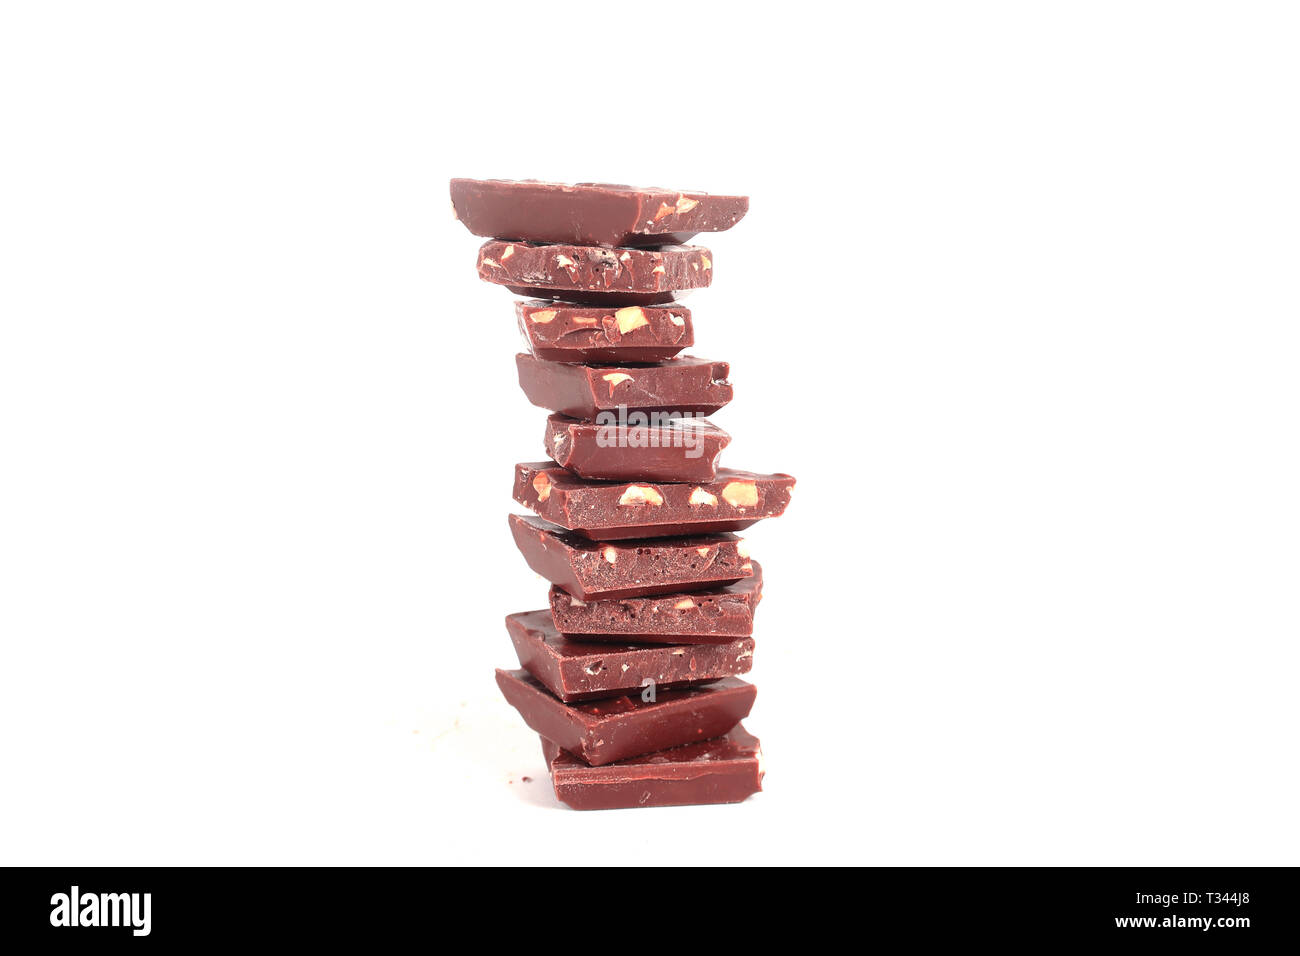 high stack of slices of original milk chocolate .isolated on white Stock Photo